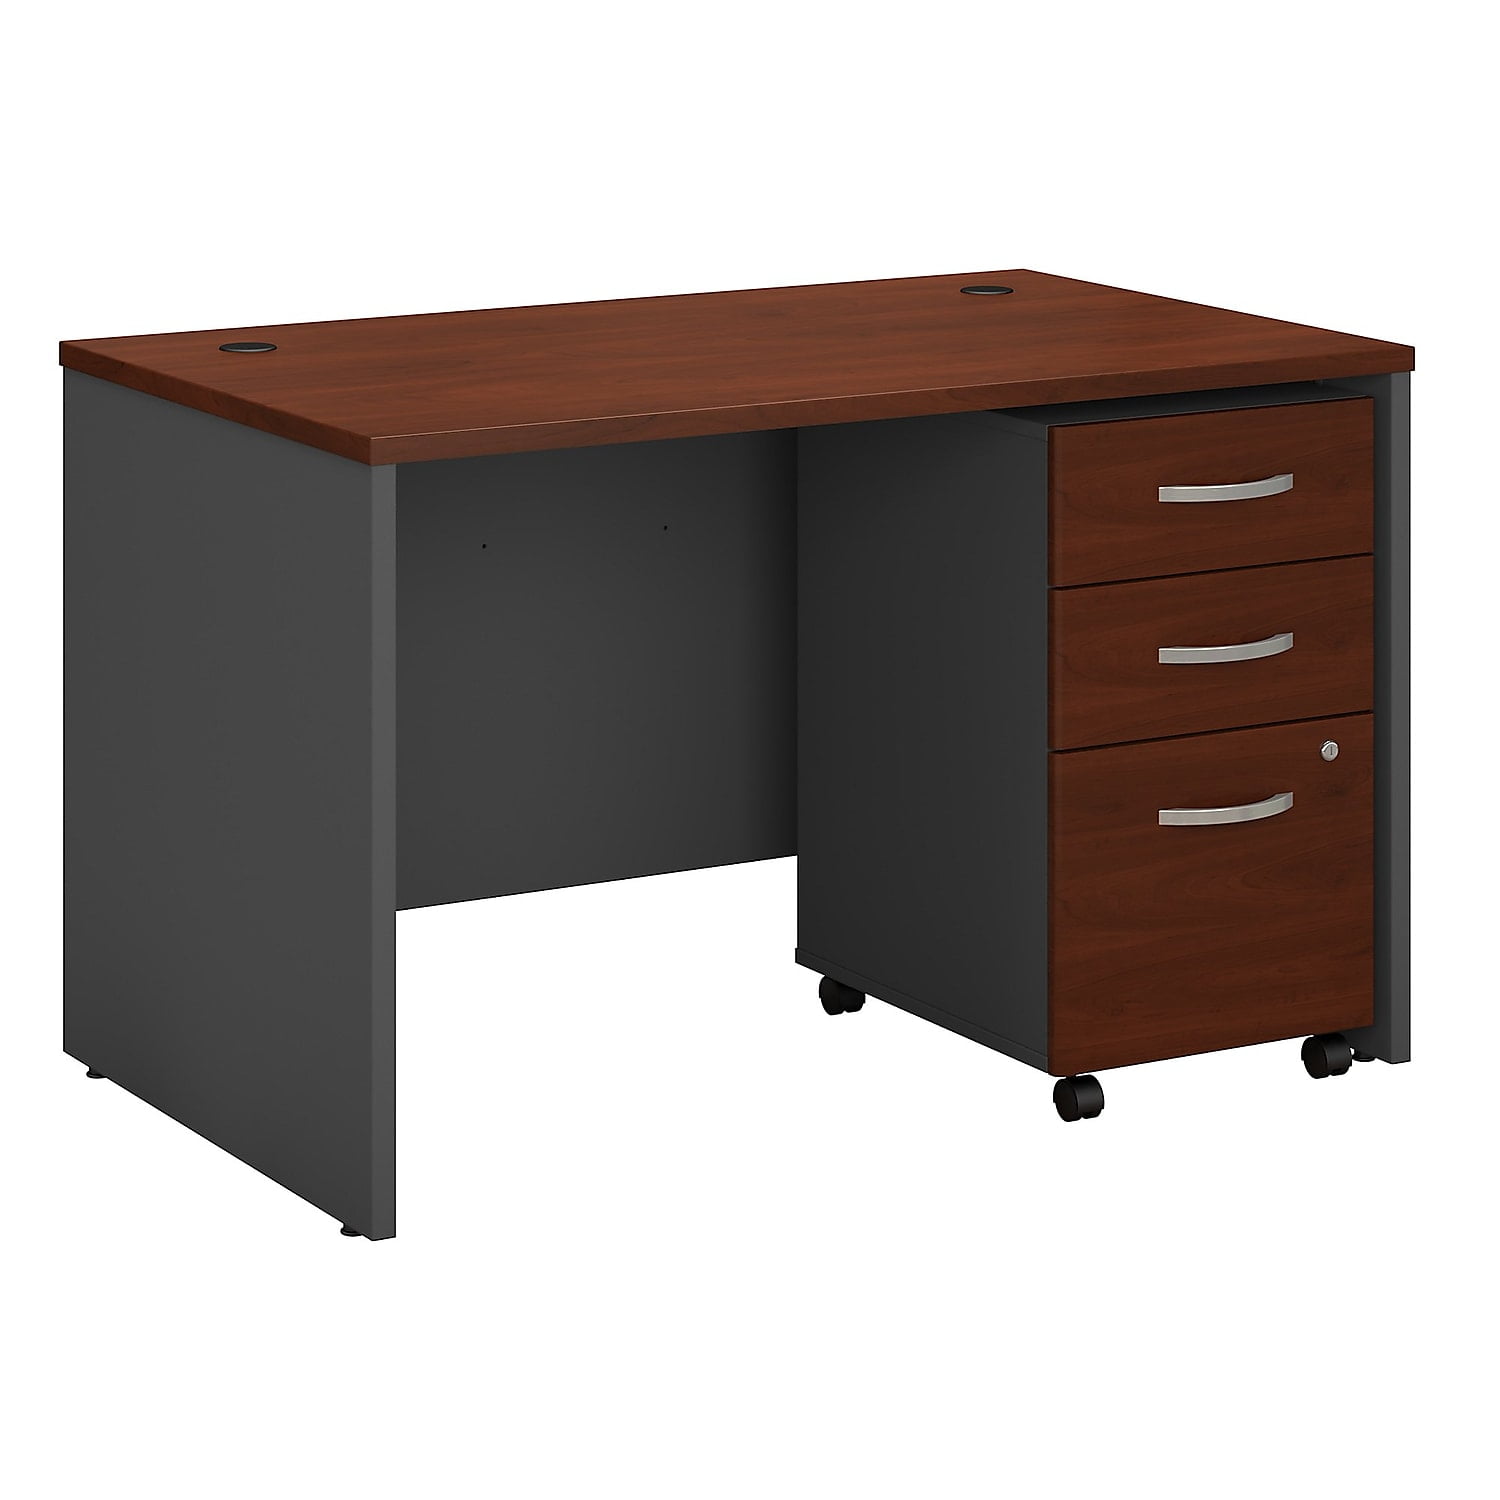 48 x 30 in. Series C Office Desk with Mobile File Cabinet - Hansen Cherry -  SeatSolutions, SE2205613